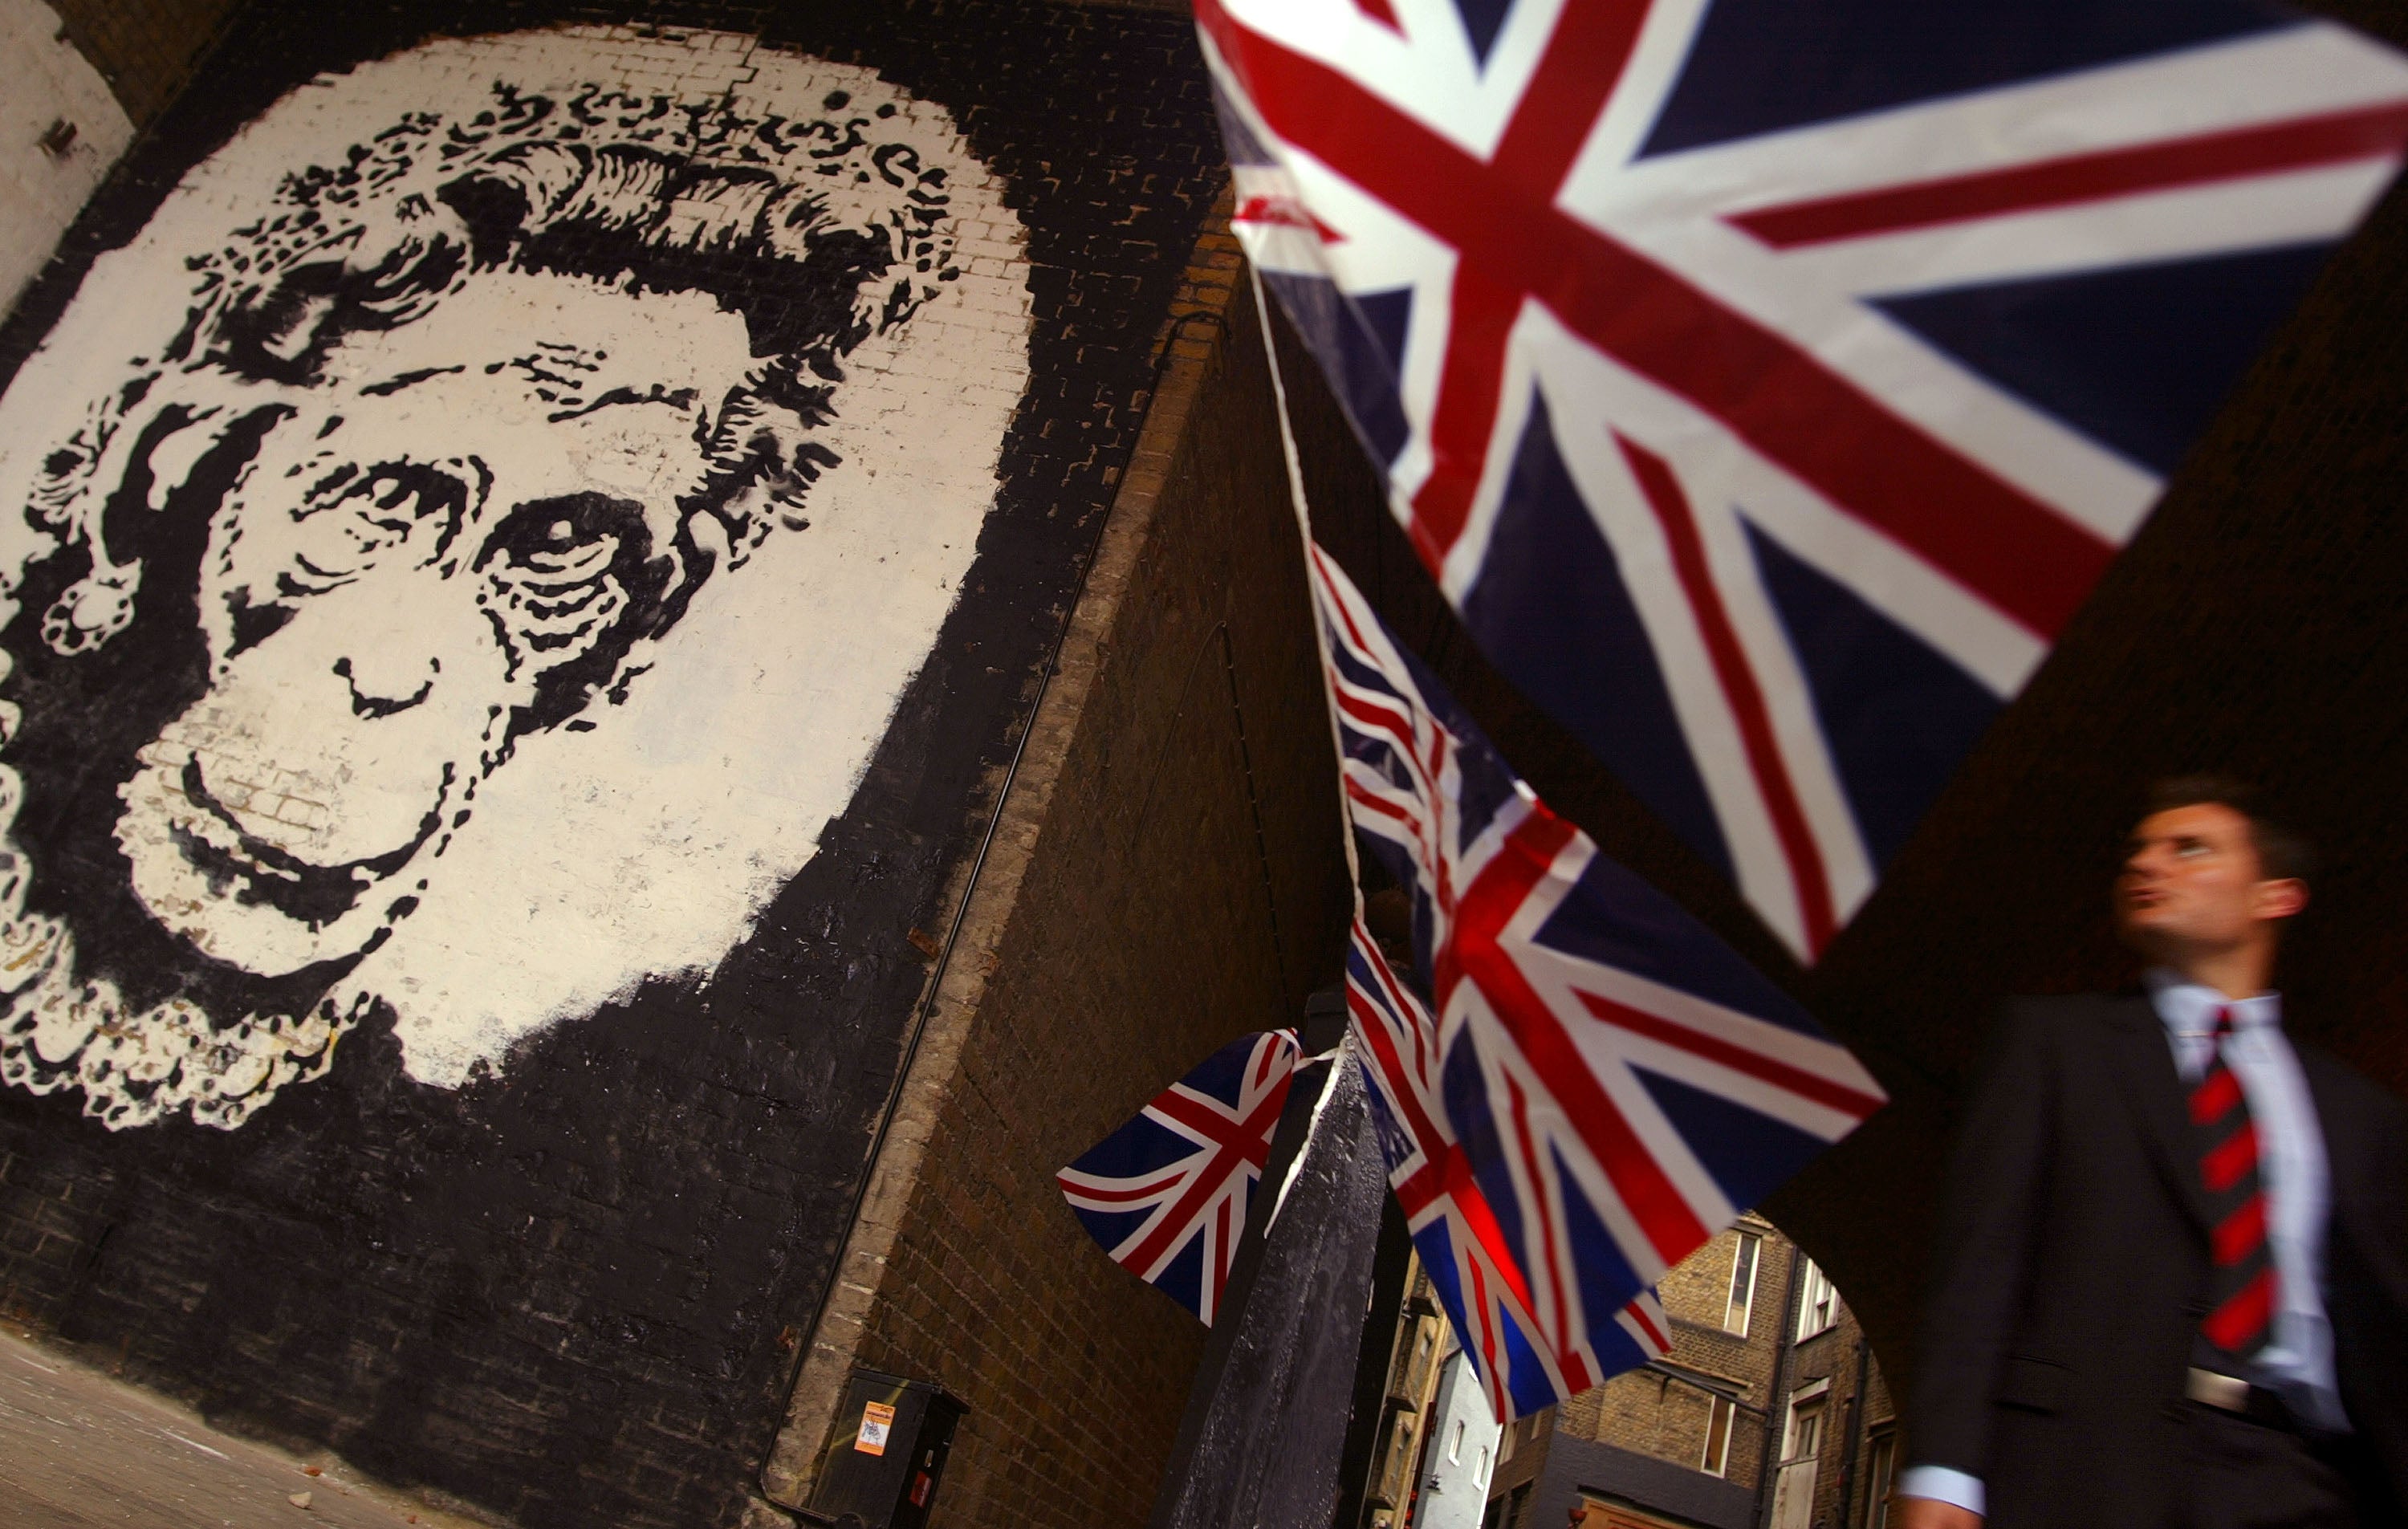 One of Banksy’s most notable early works, which was shared in response to the Queen’s Golden Jubilee in May 2002